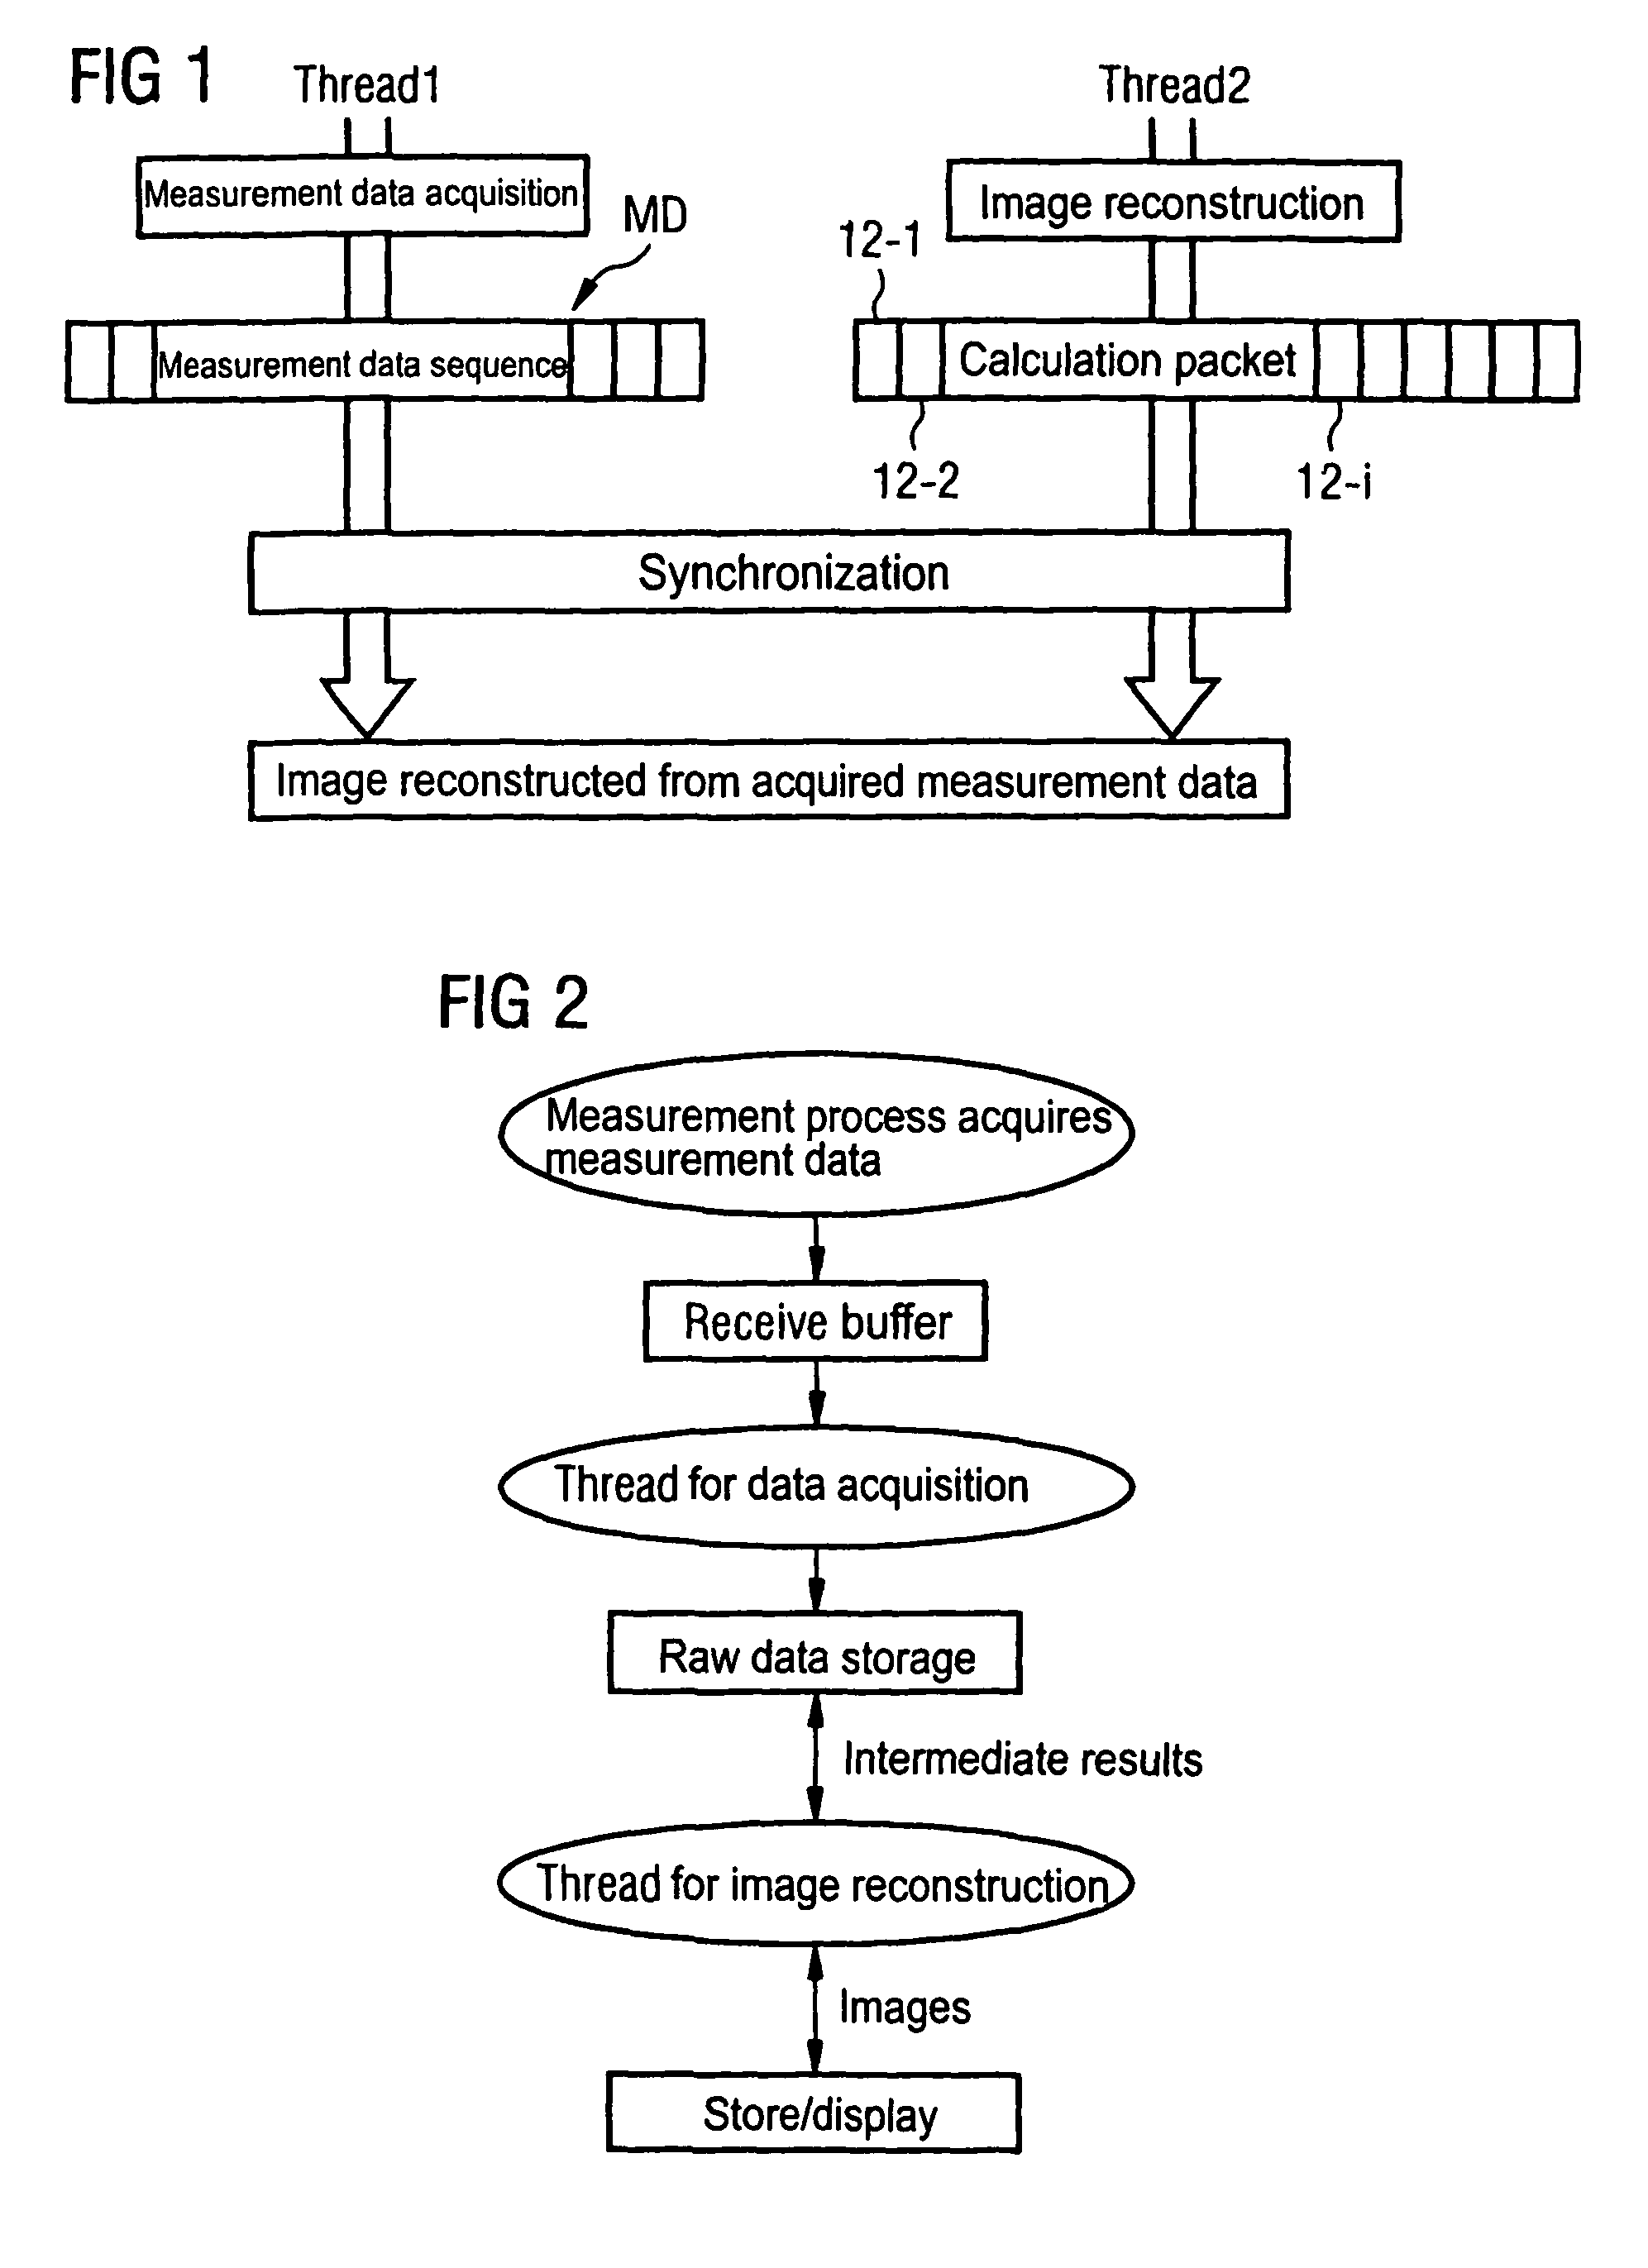 Method and device for controlling image data acquisition and image reconstruction